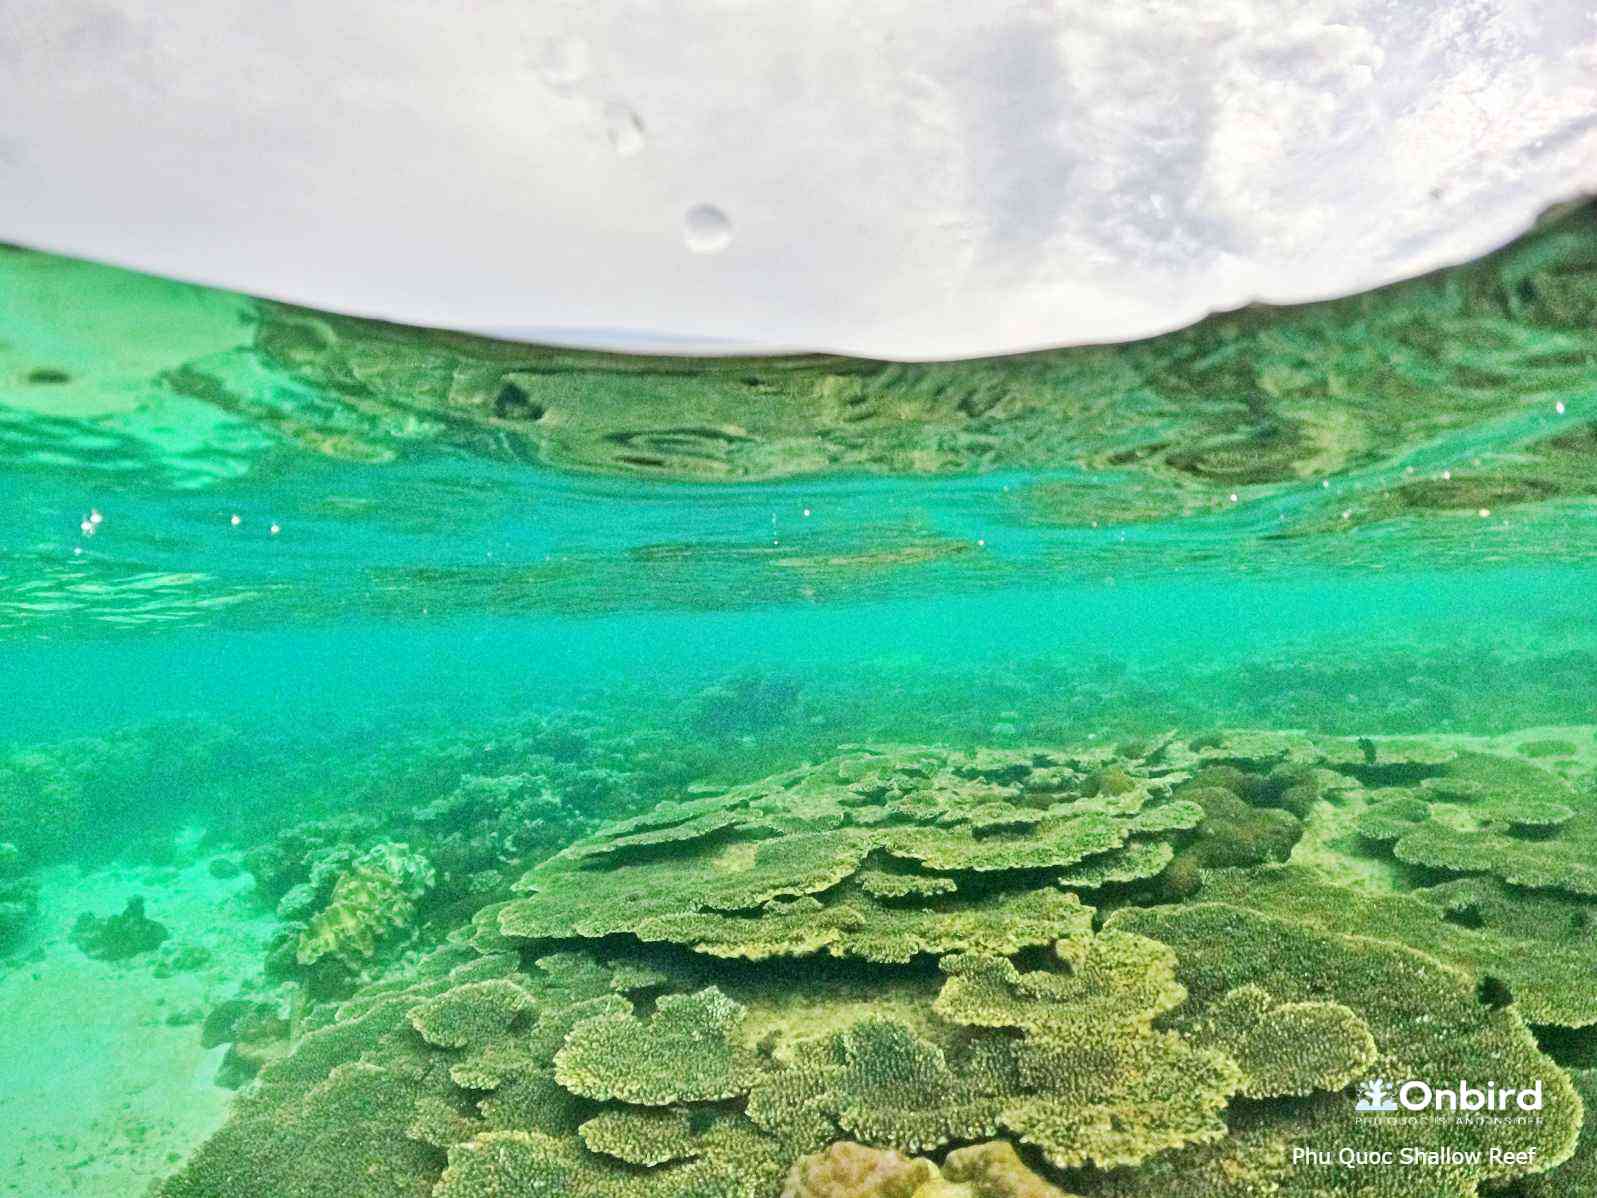 Shallow coral reef, Phu Quoc Island, Vietnam - the Kingdom of table corals